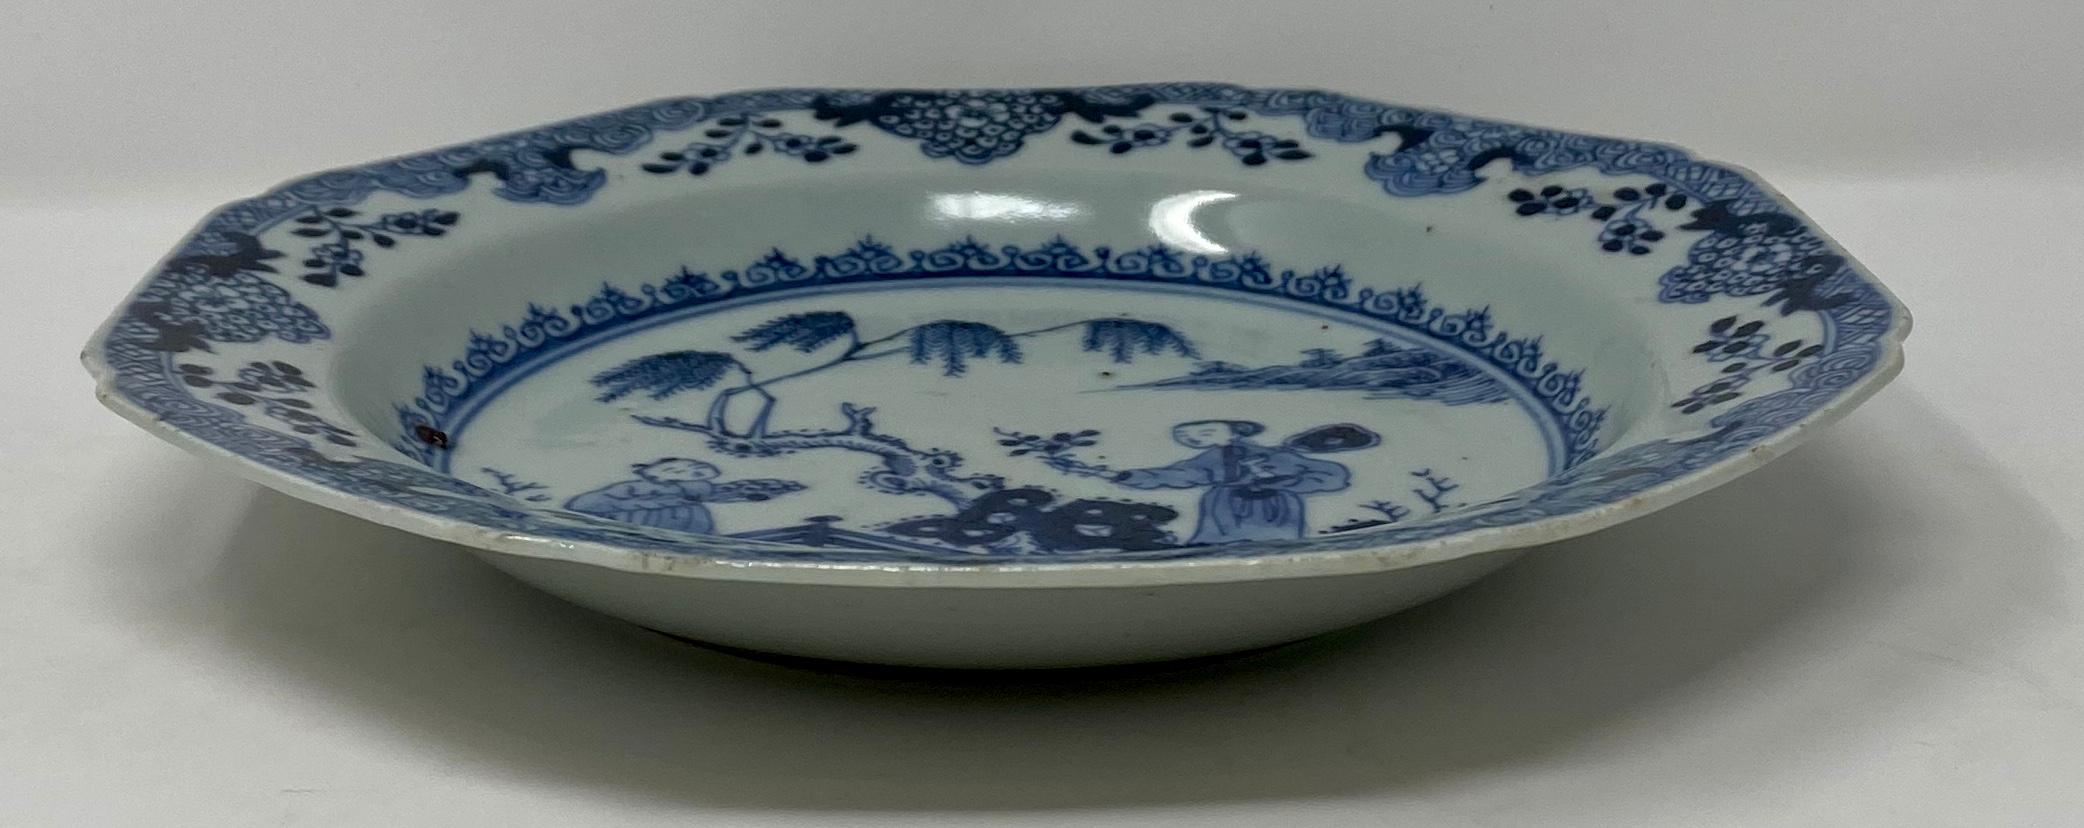 Antique 18th century Chinese plate.
